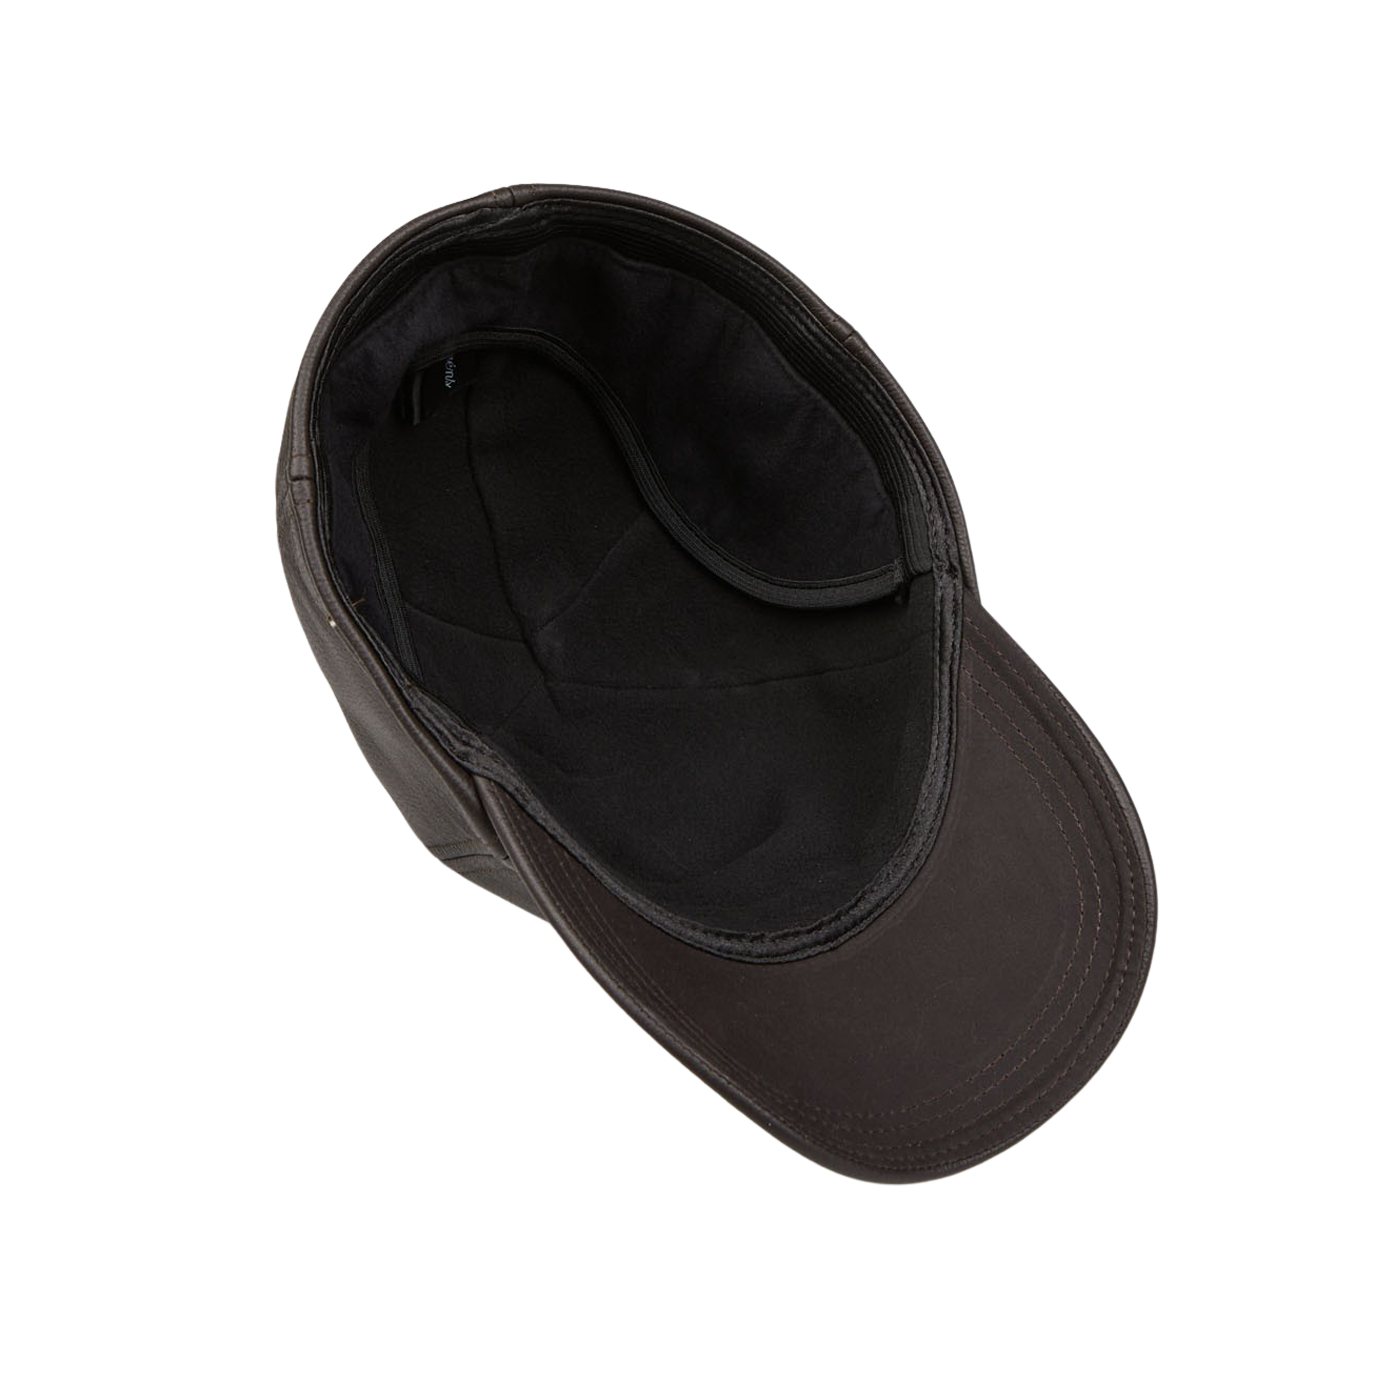 A Dark Brown Elk Leather Baseball Cap by Wigéns on a white surface.